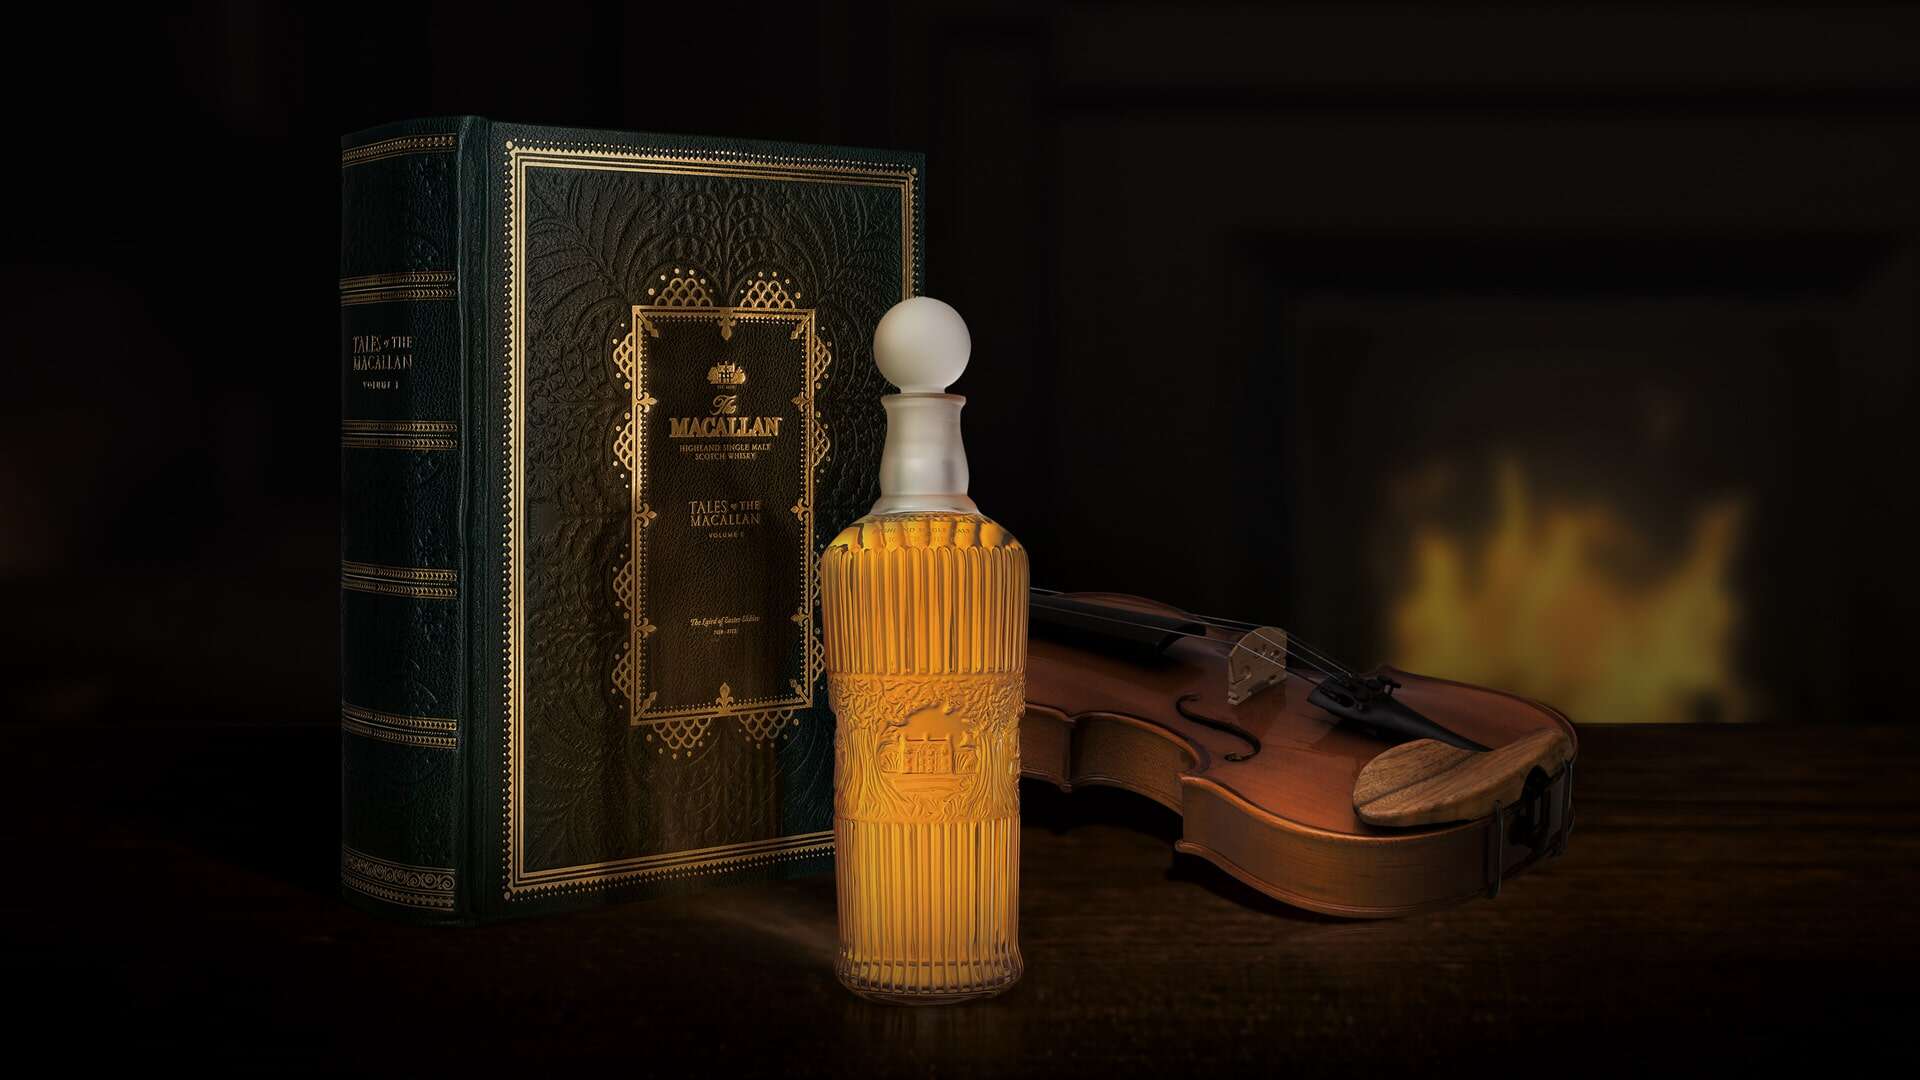 tales of the macallan decanter and book